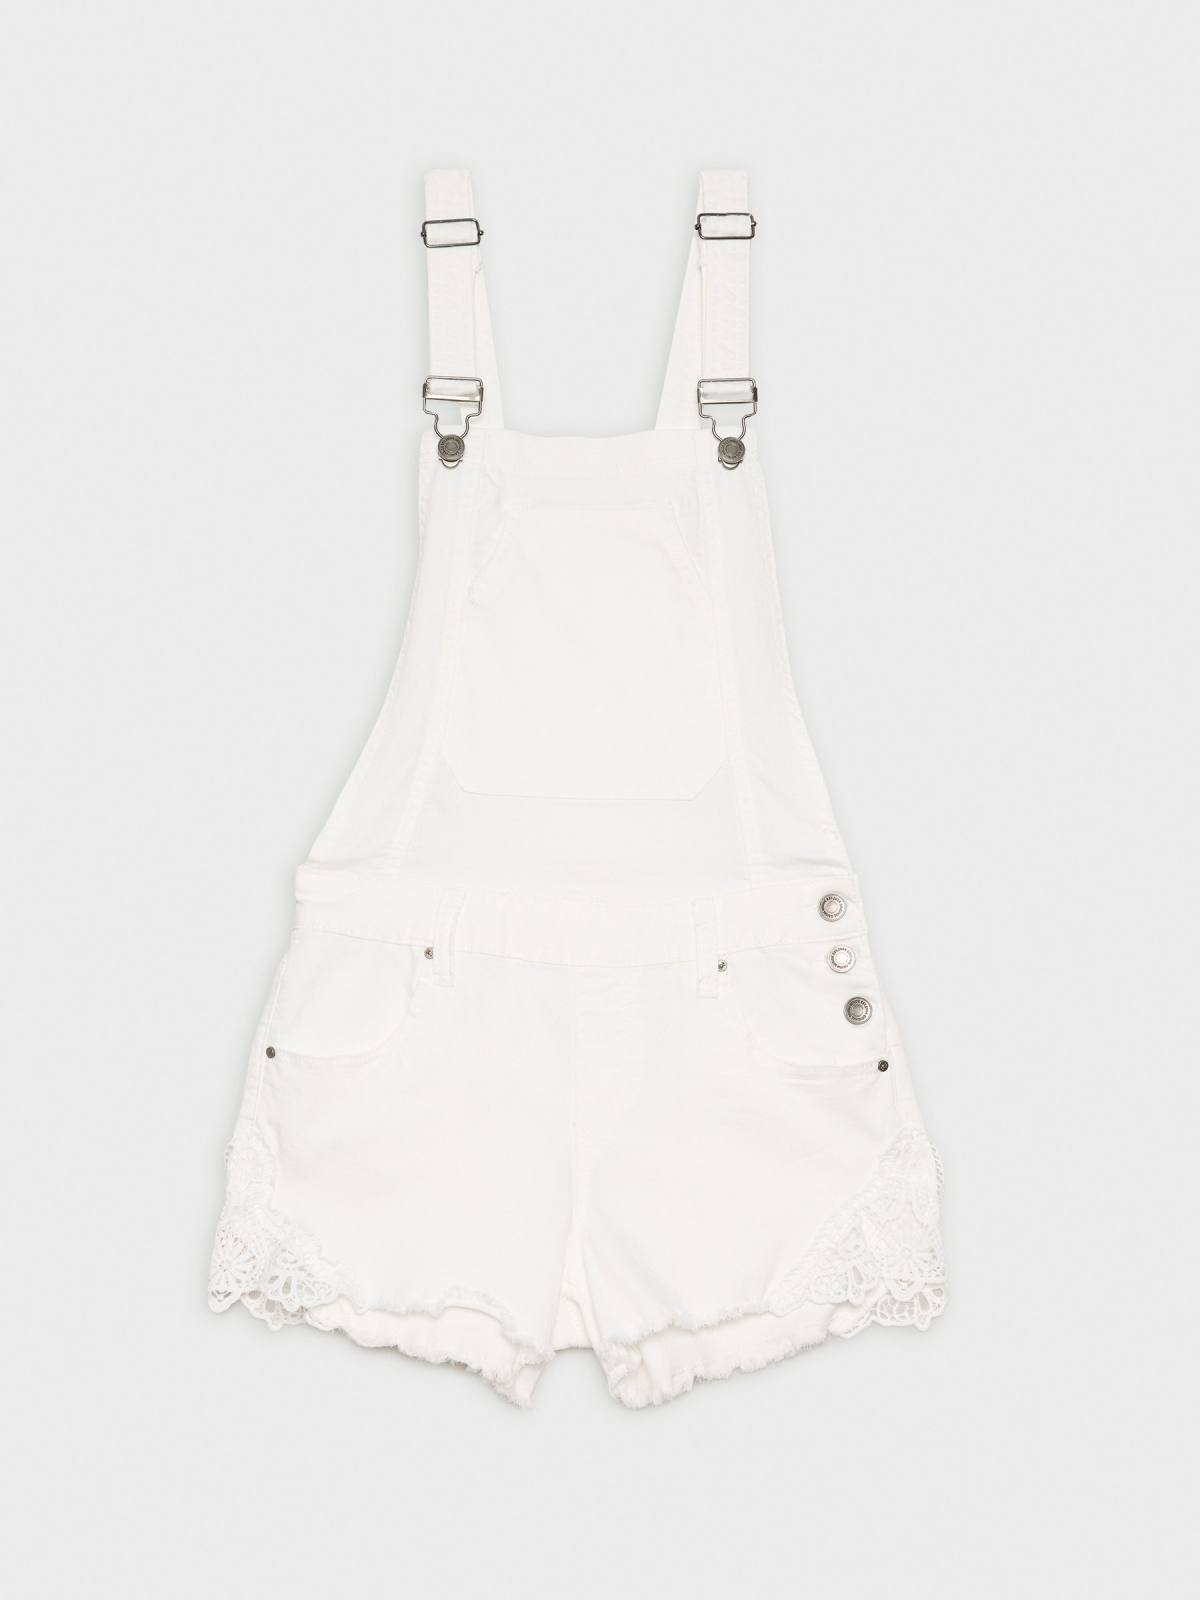  Dungarees combined crochet white